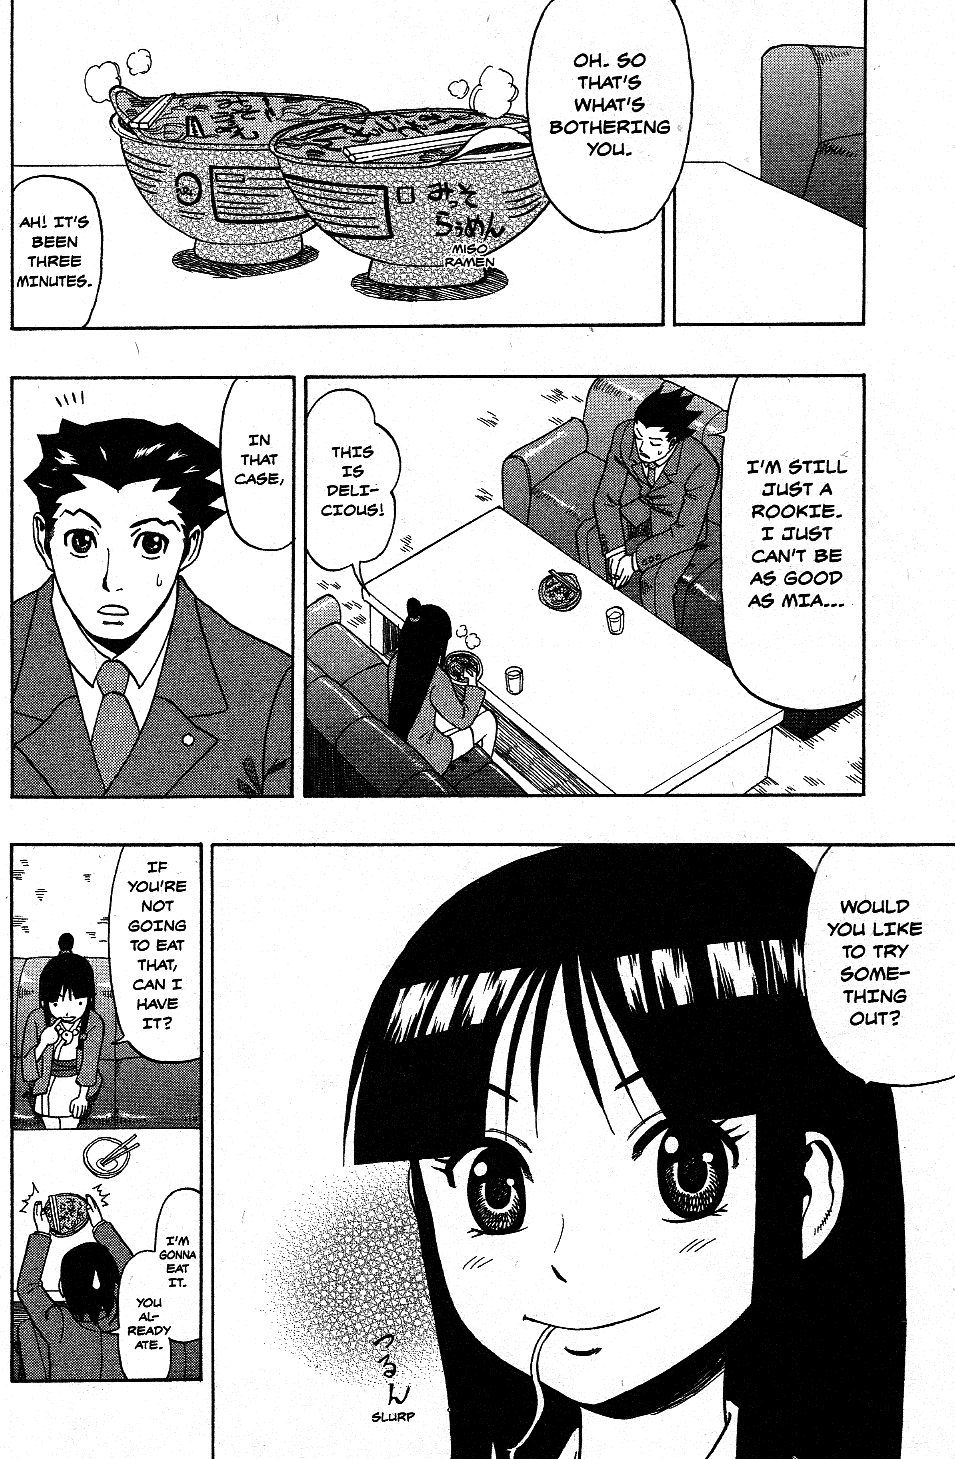 Phoenix Wright: Ace Attorney - Official Casebook Vol.1 Chapter 16: The Legendary Defense Attorney - By Kikuchiyo Anko - Picture 3